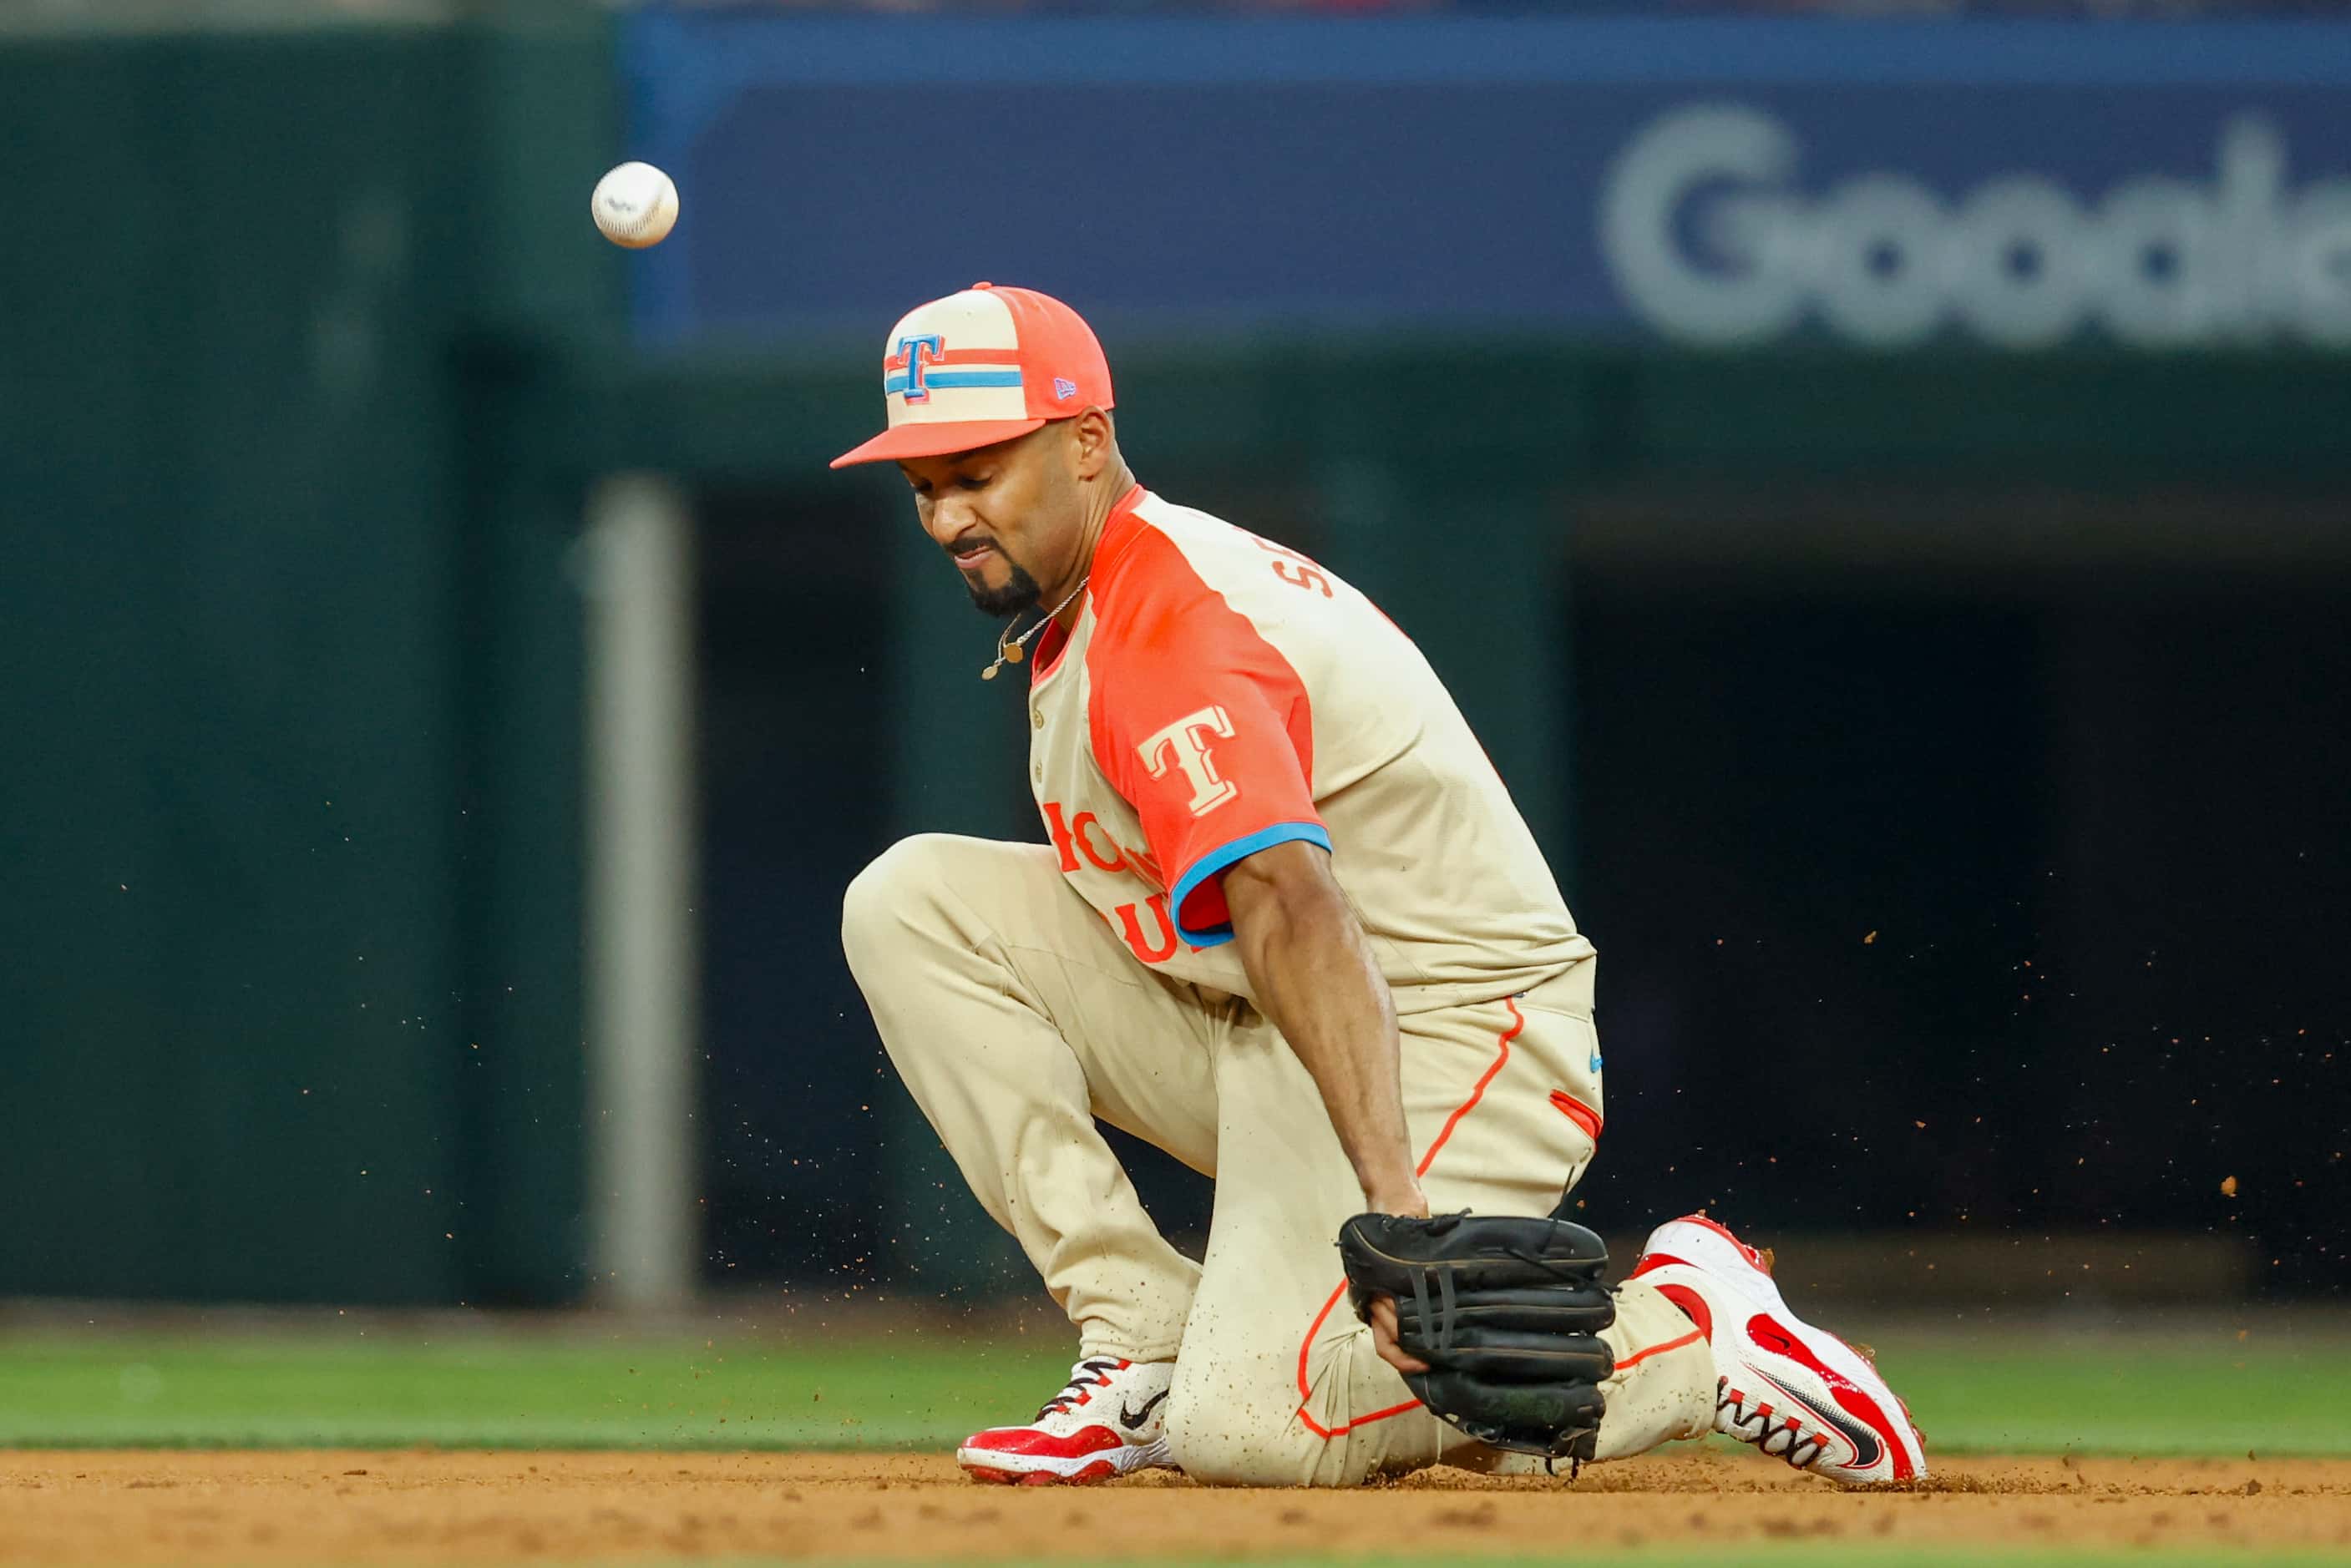 American League's Marcus Semien, of the Texas Rangers, misplays the ball during the third...